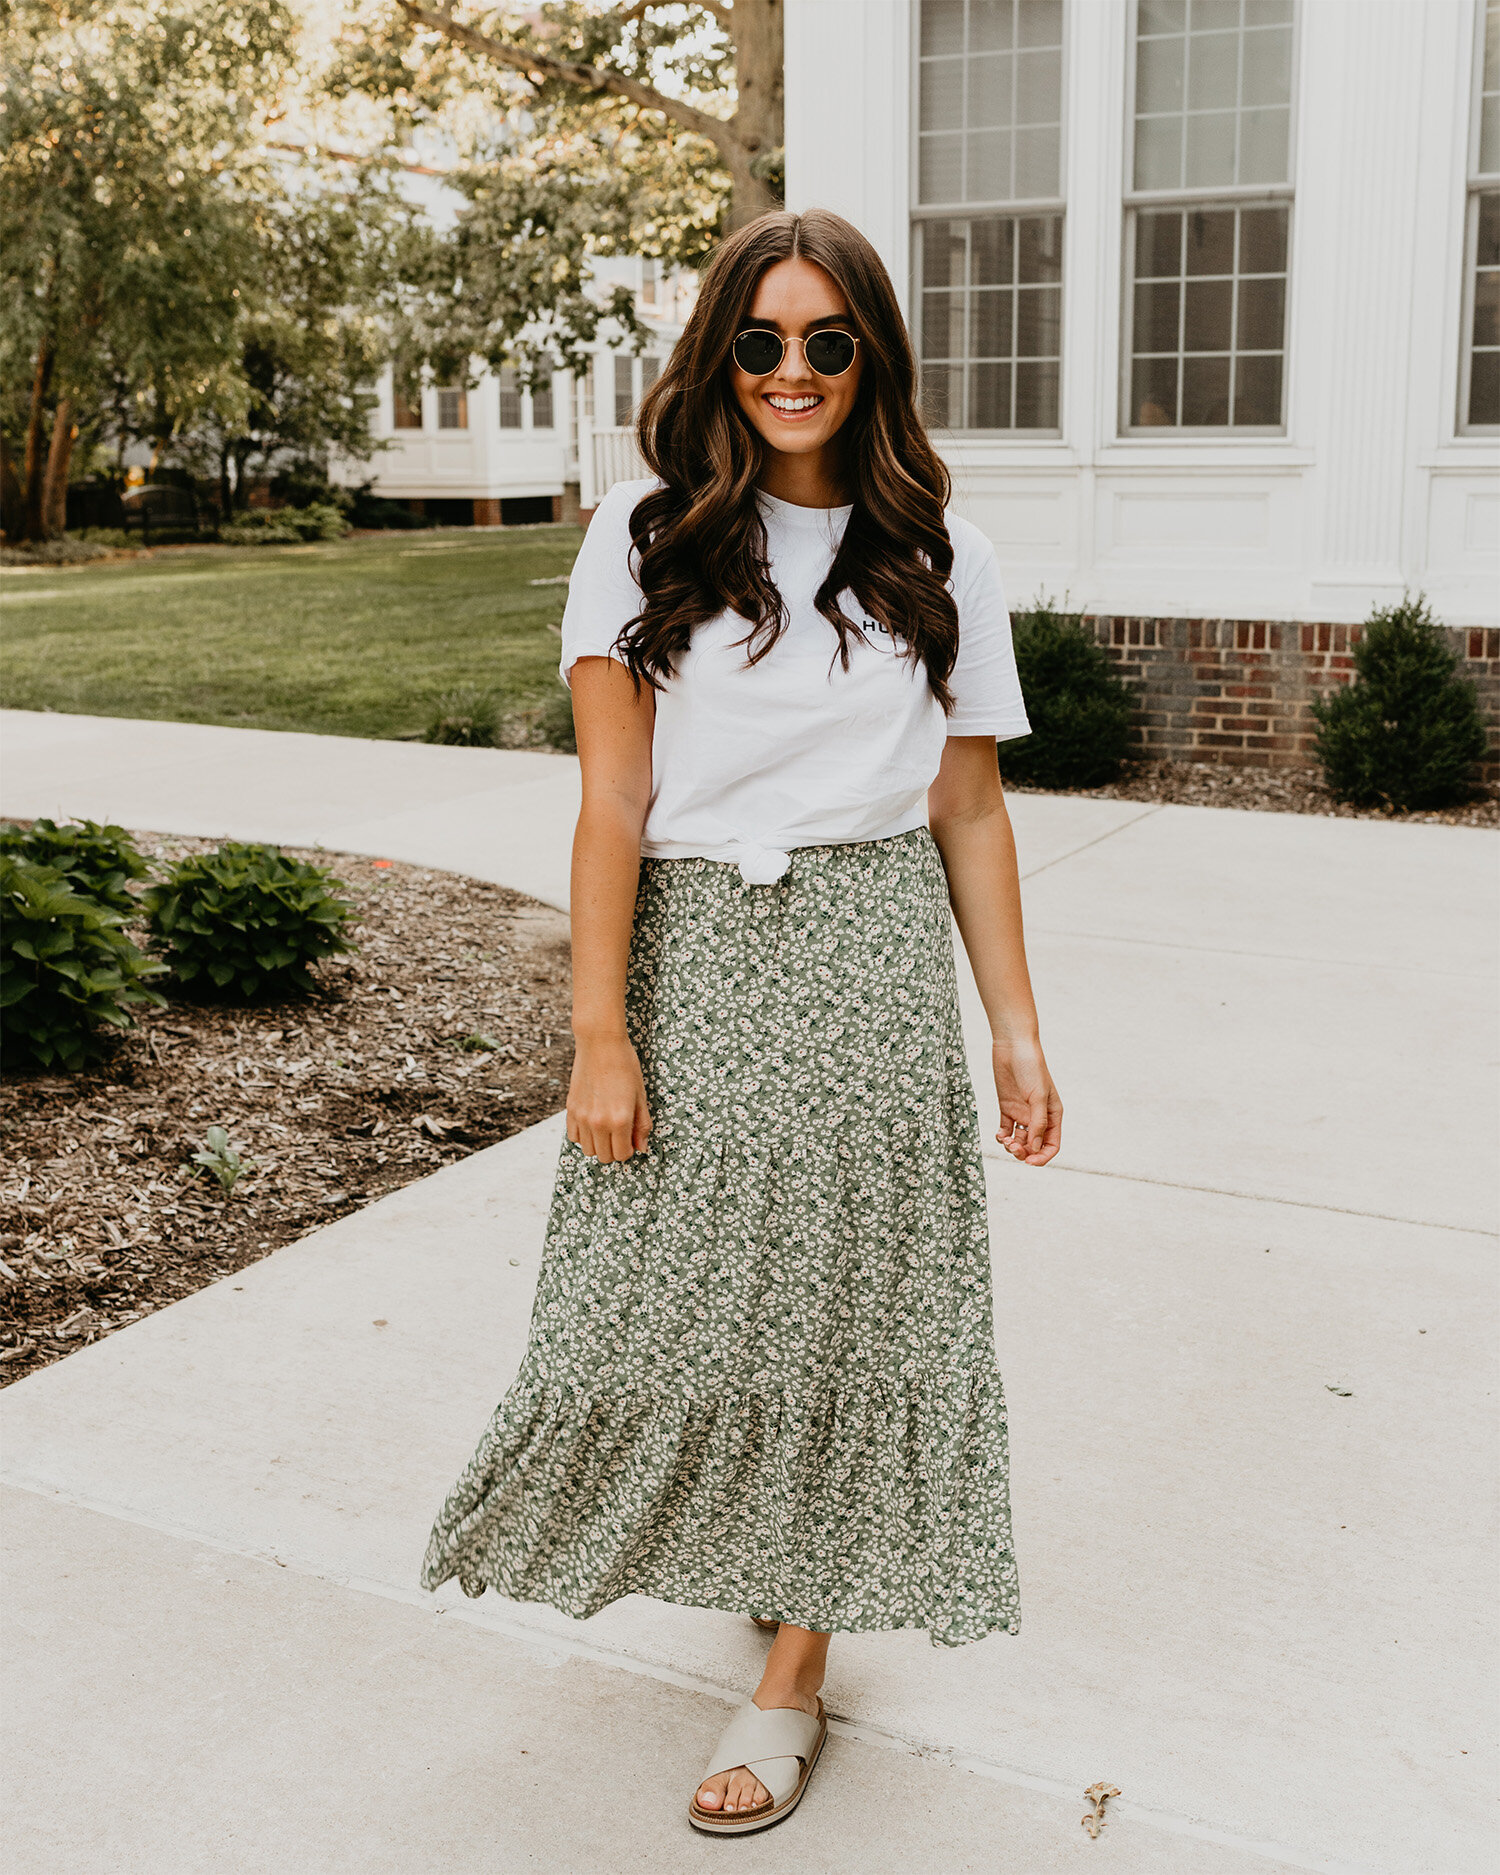 Transition Summer Skirts and Dresses Into Fall.jpg